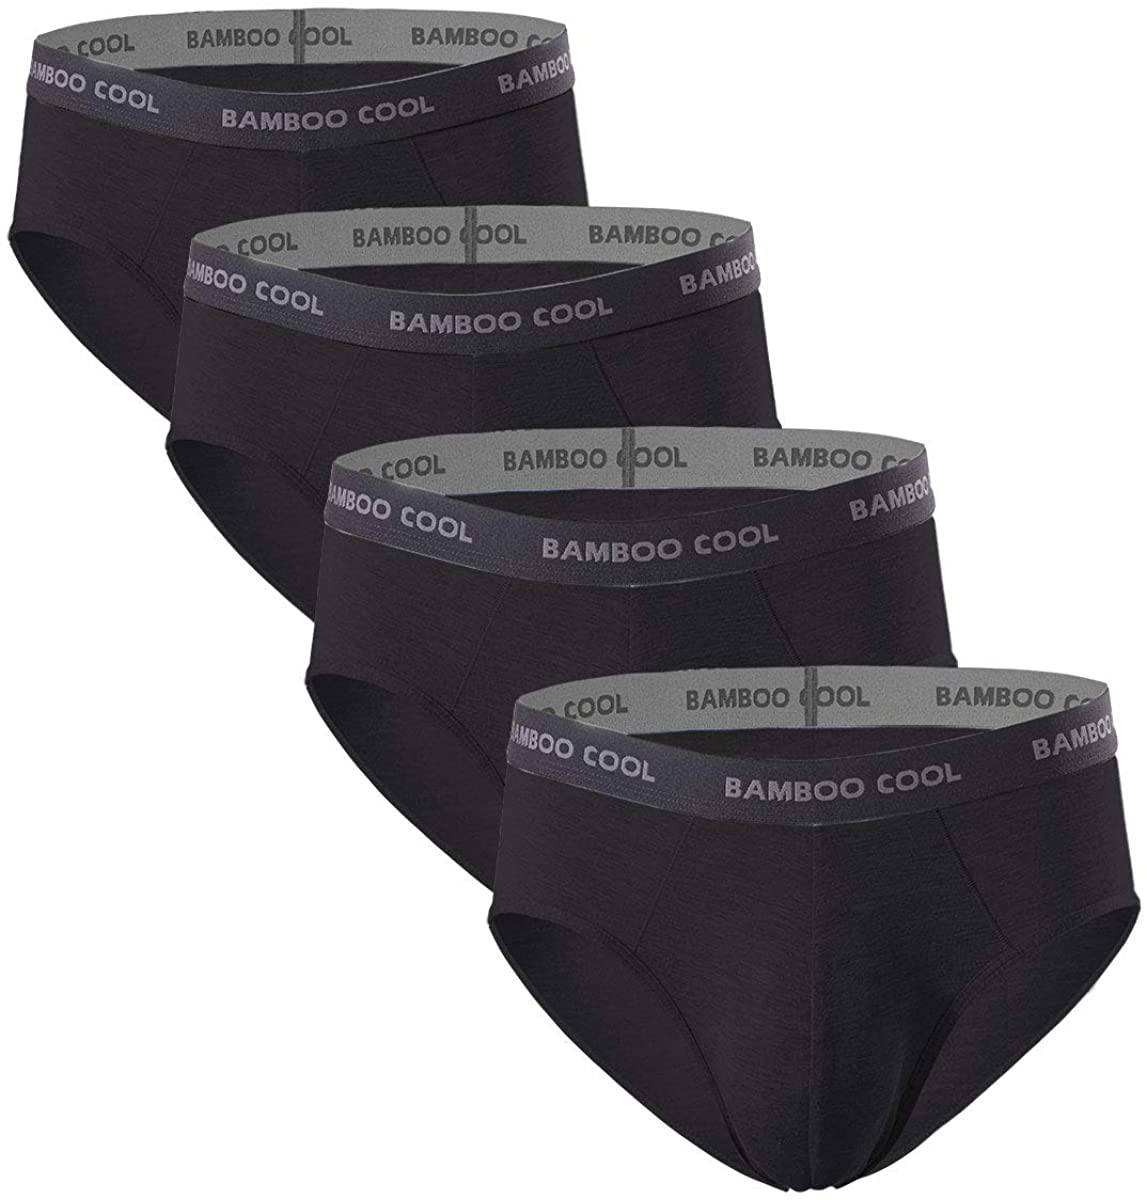 BAMBOO COOL Men's Underwear boxer briefs Soft Comfortable Bamboo Viscose  Underwear Trunks (4 or 7 Pack)